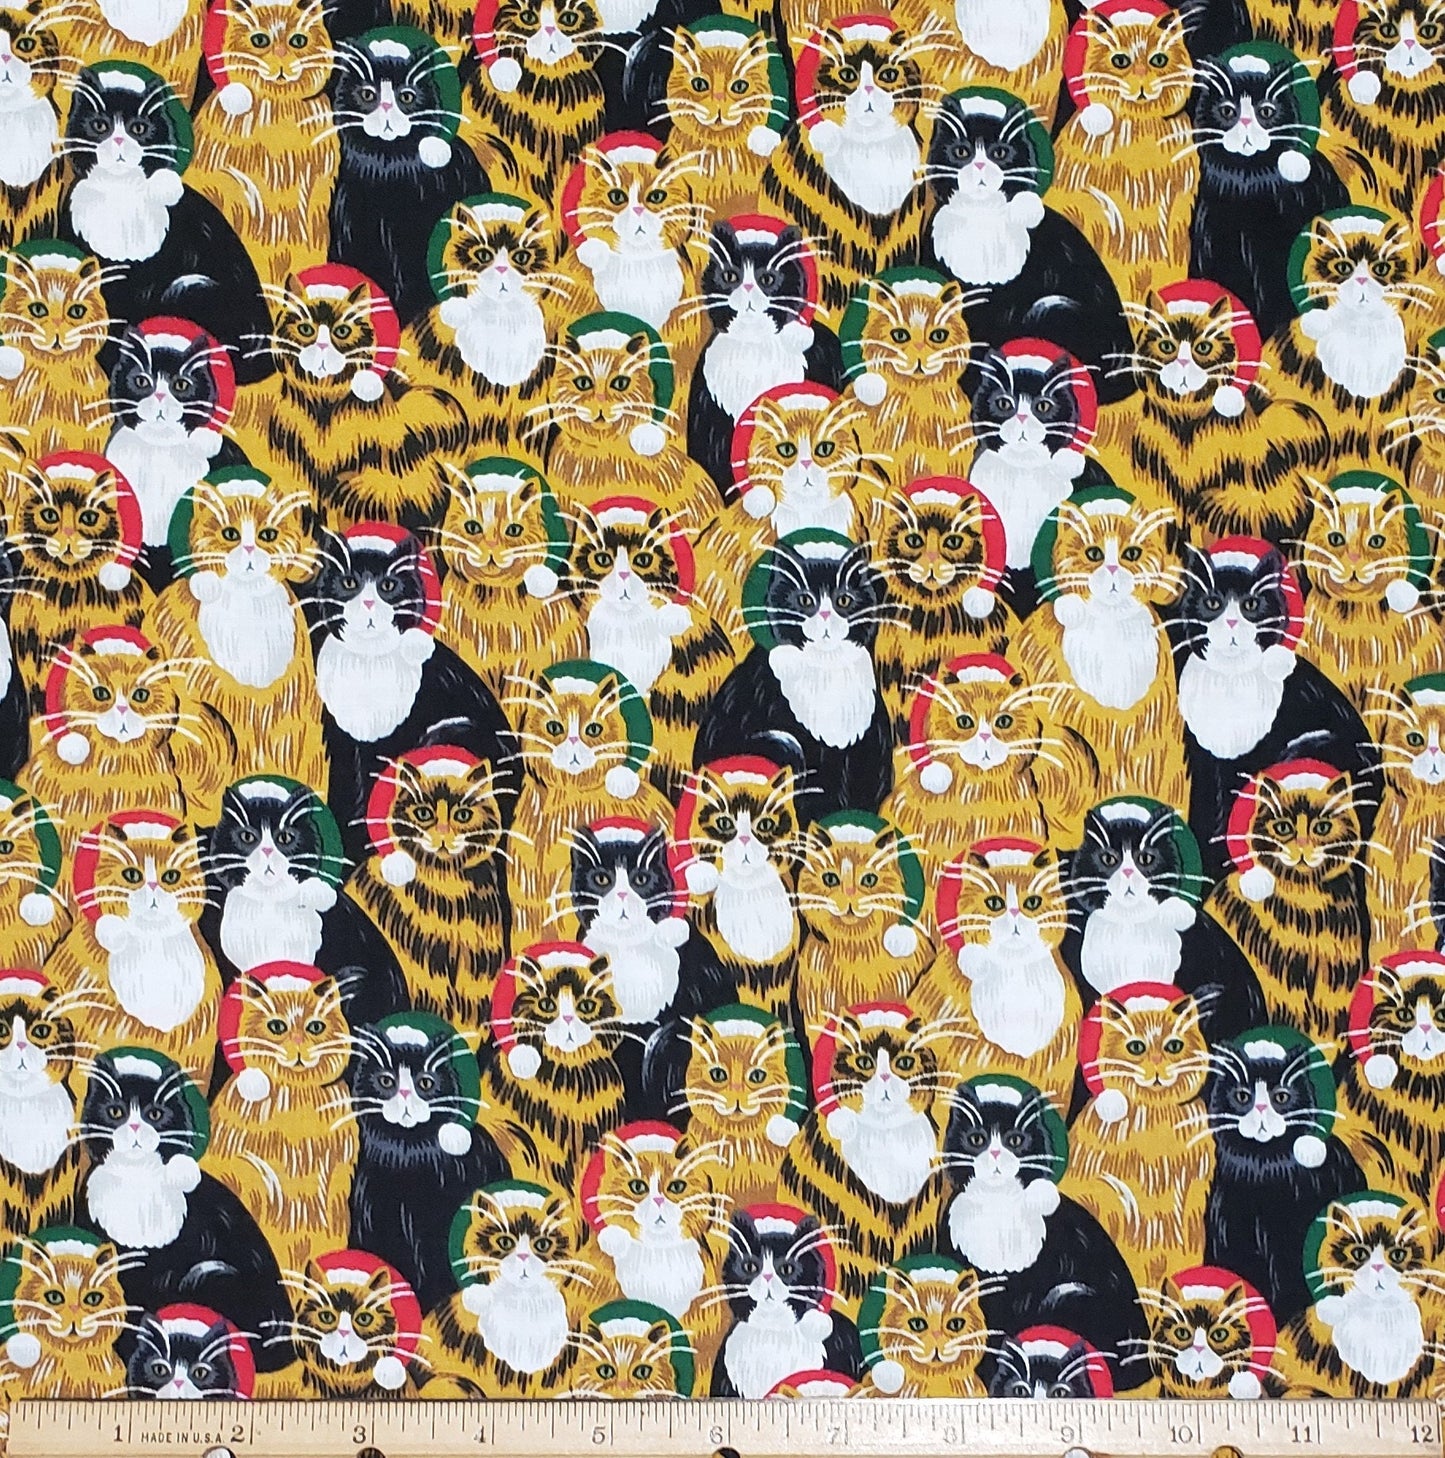 Fabric Traditions - The Stephen Lawrence Co. 1992 - Cats in Santa Hats